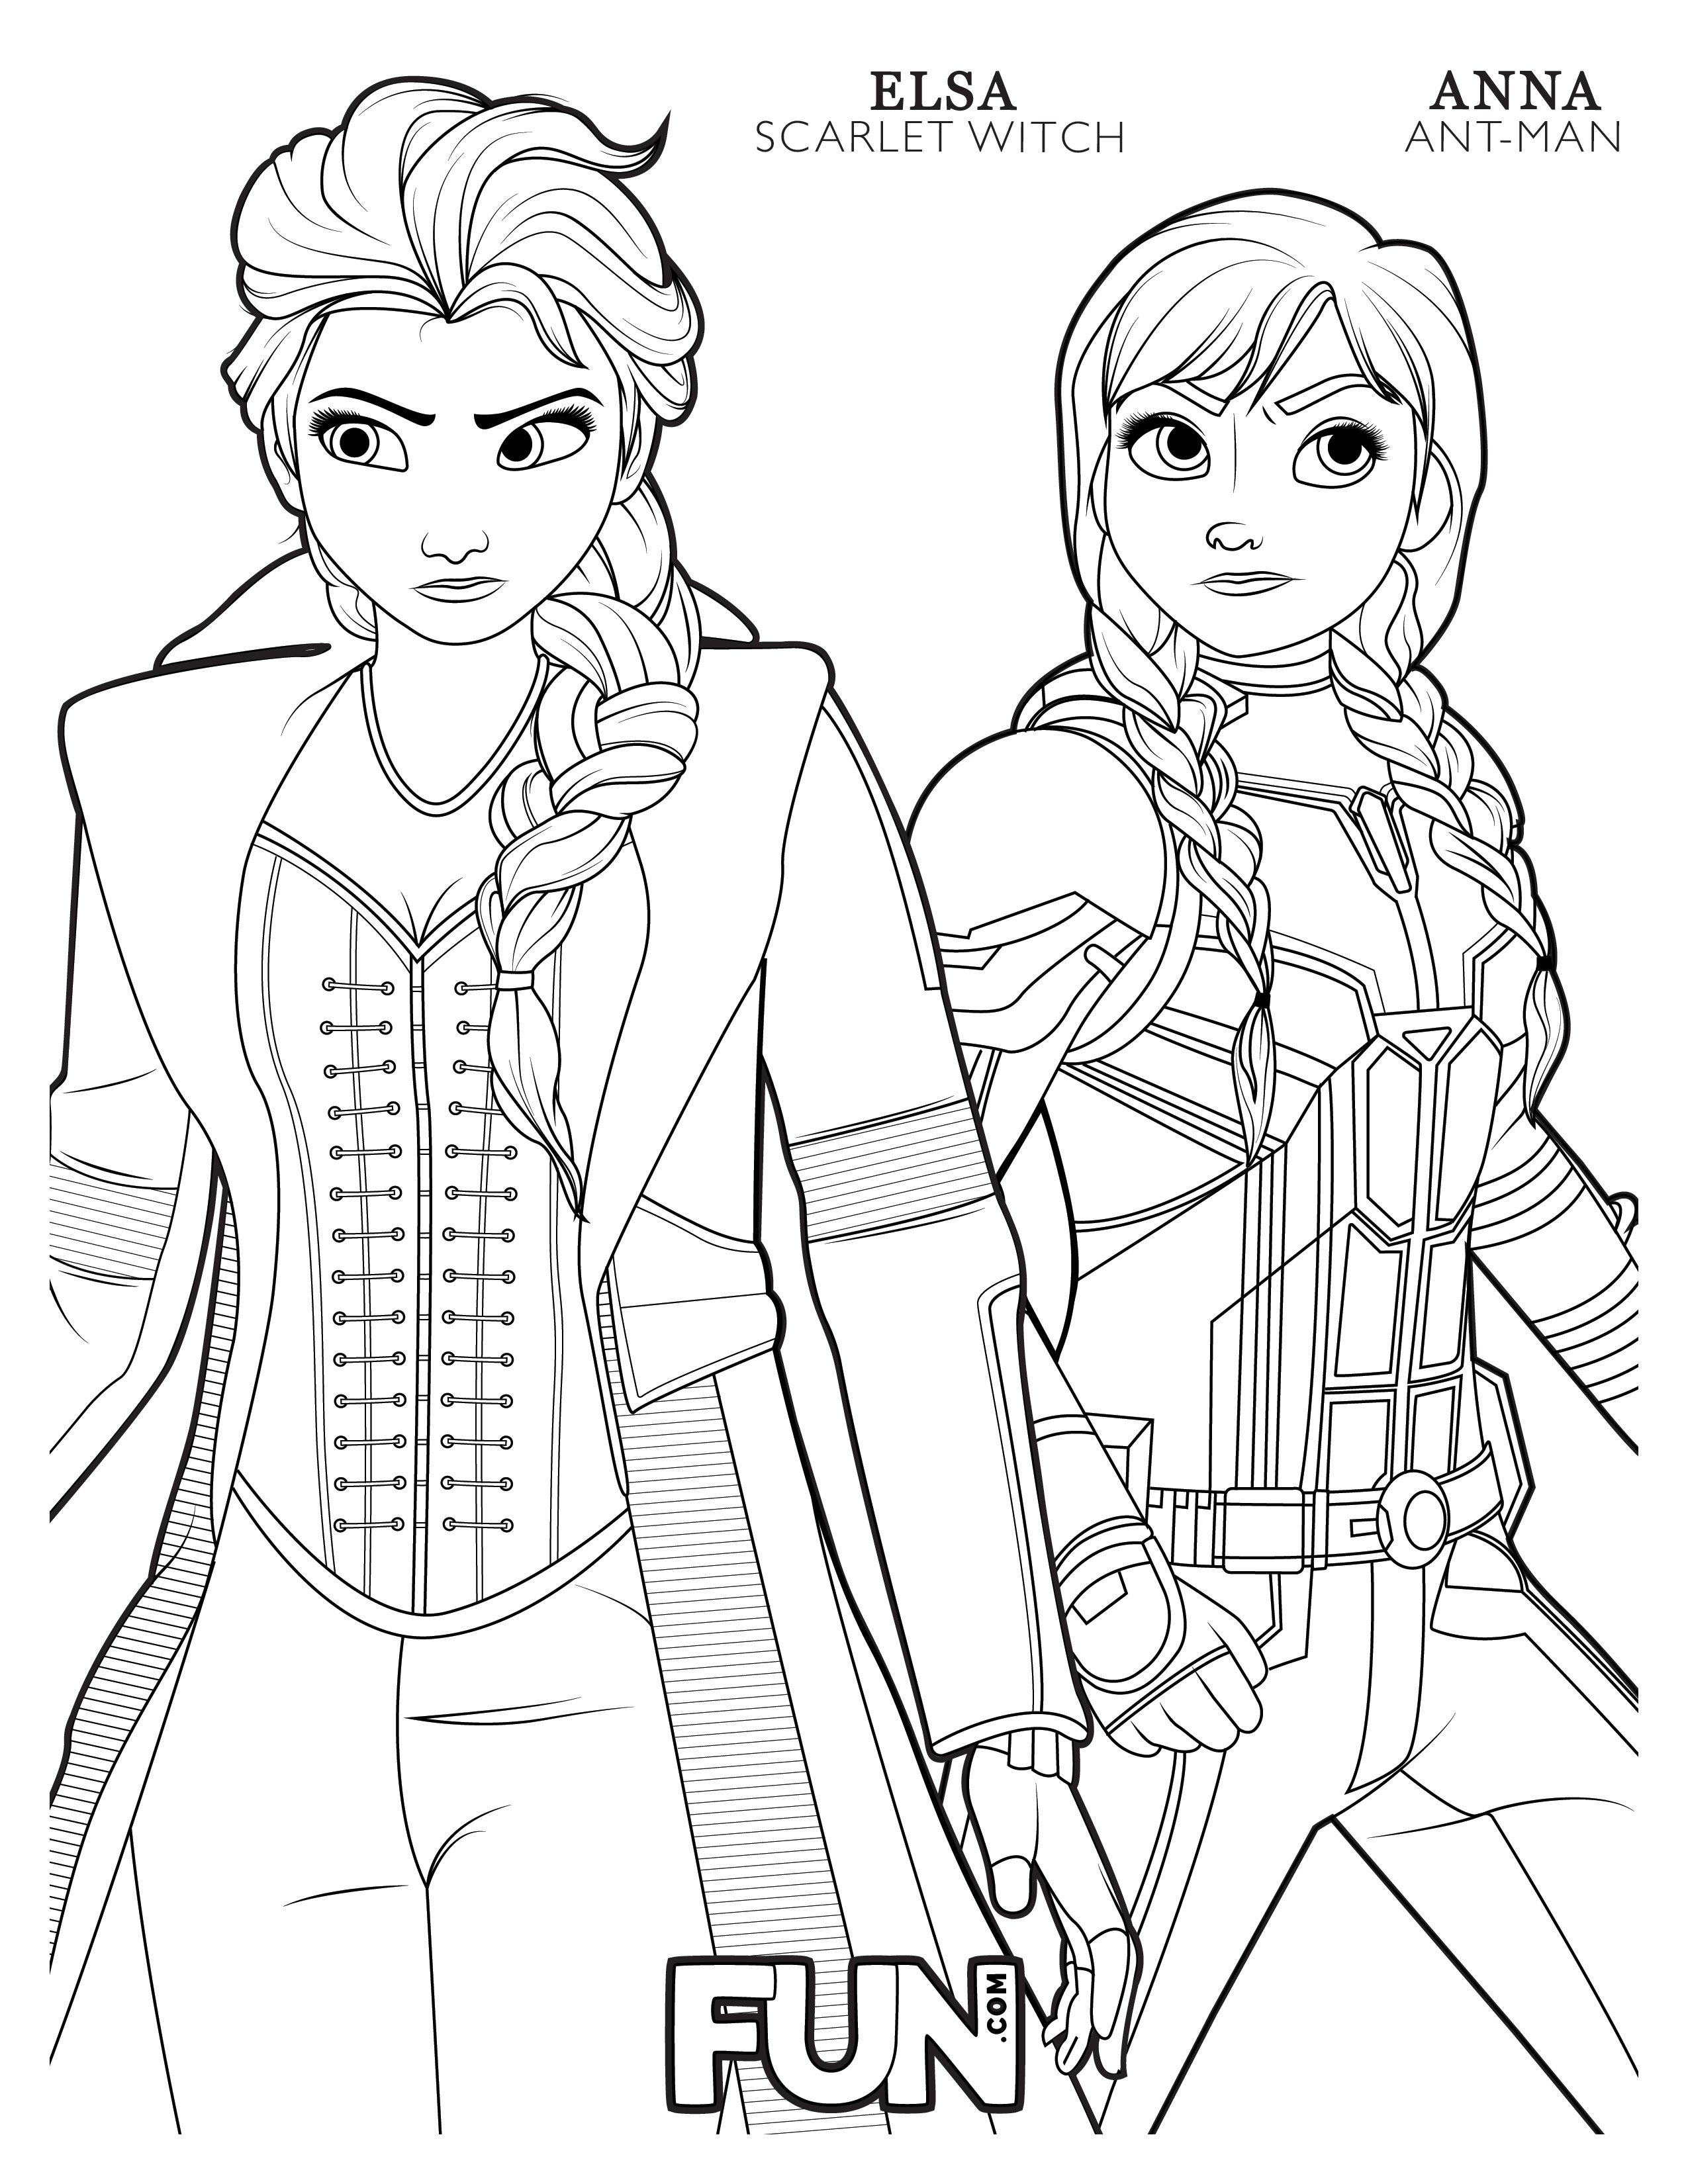 Anna Ant-Man and Elsa Scarlet Witch Coloring Page